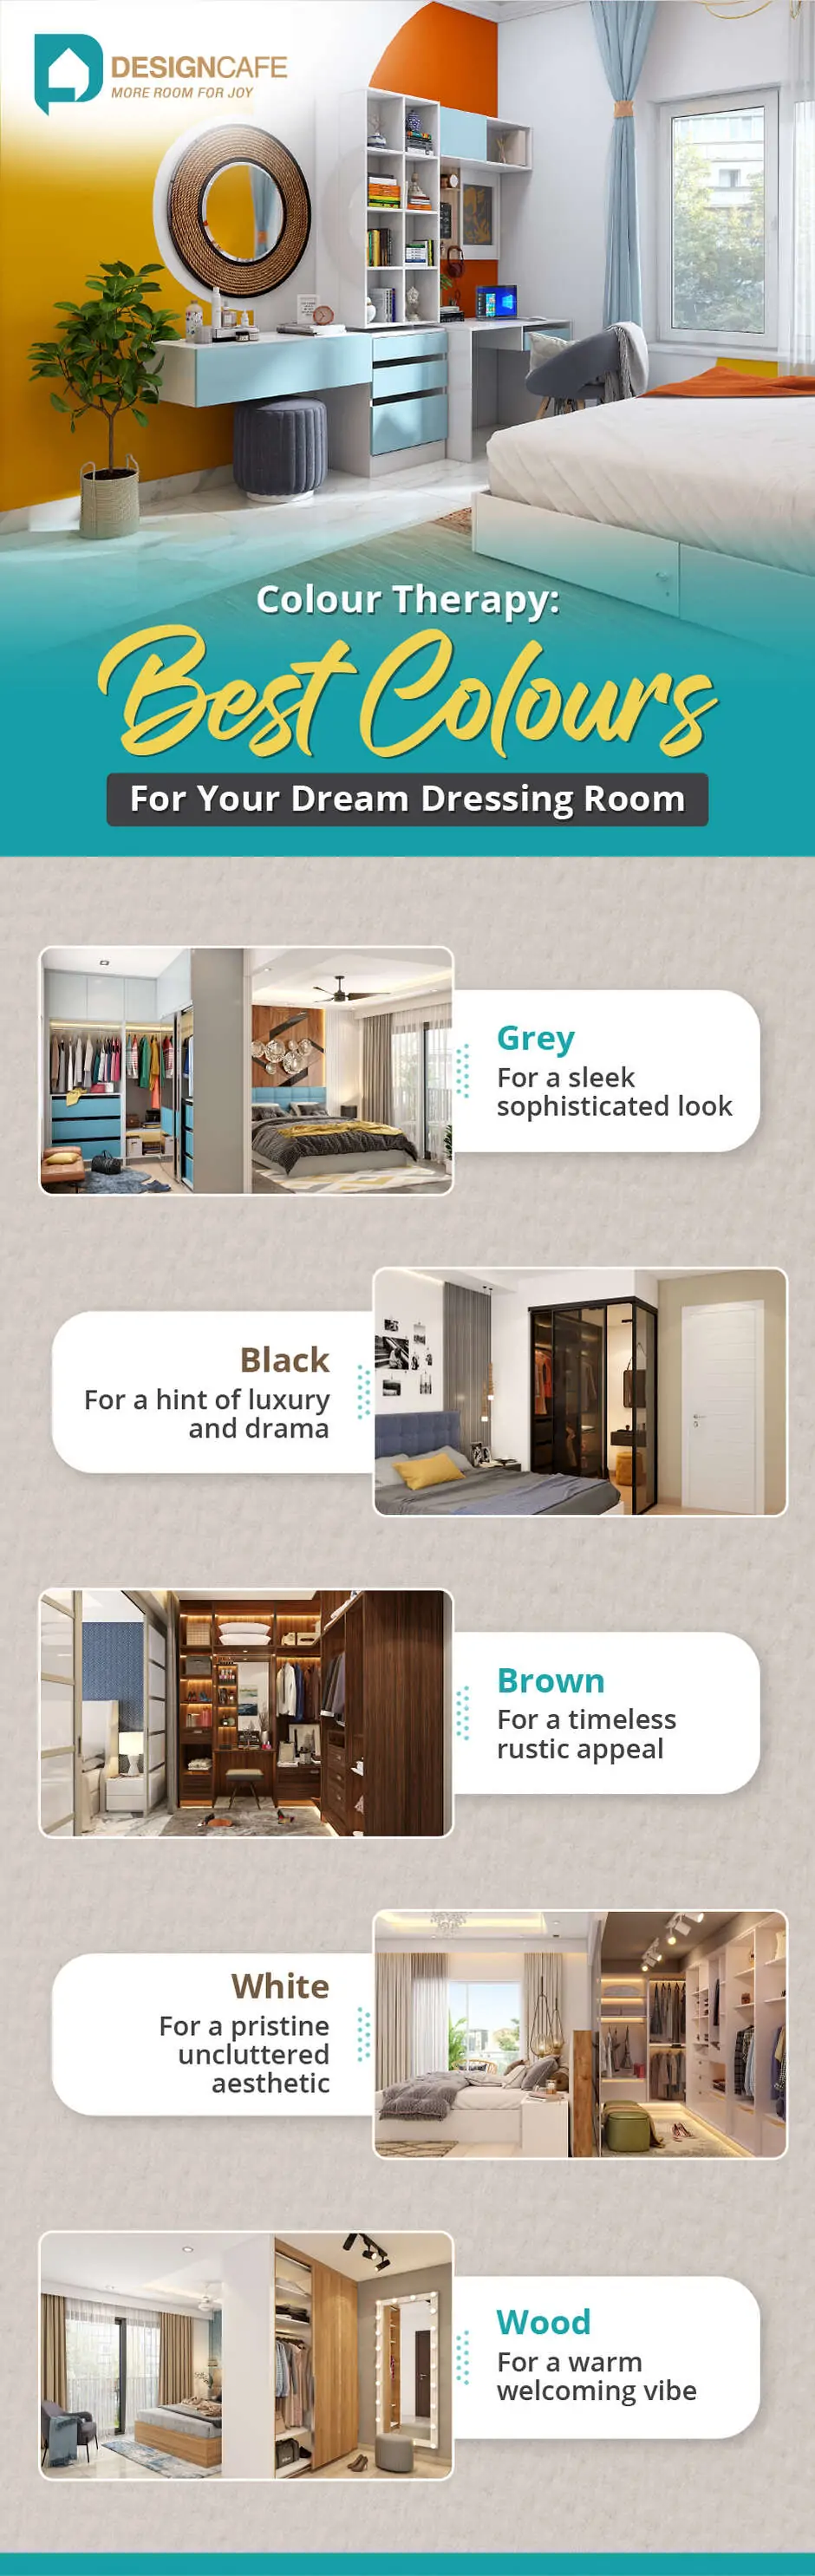 Best colours for a dressing room are grey, black, brown, white and wood tone